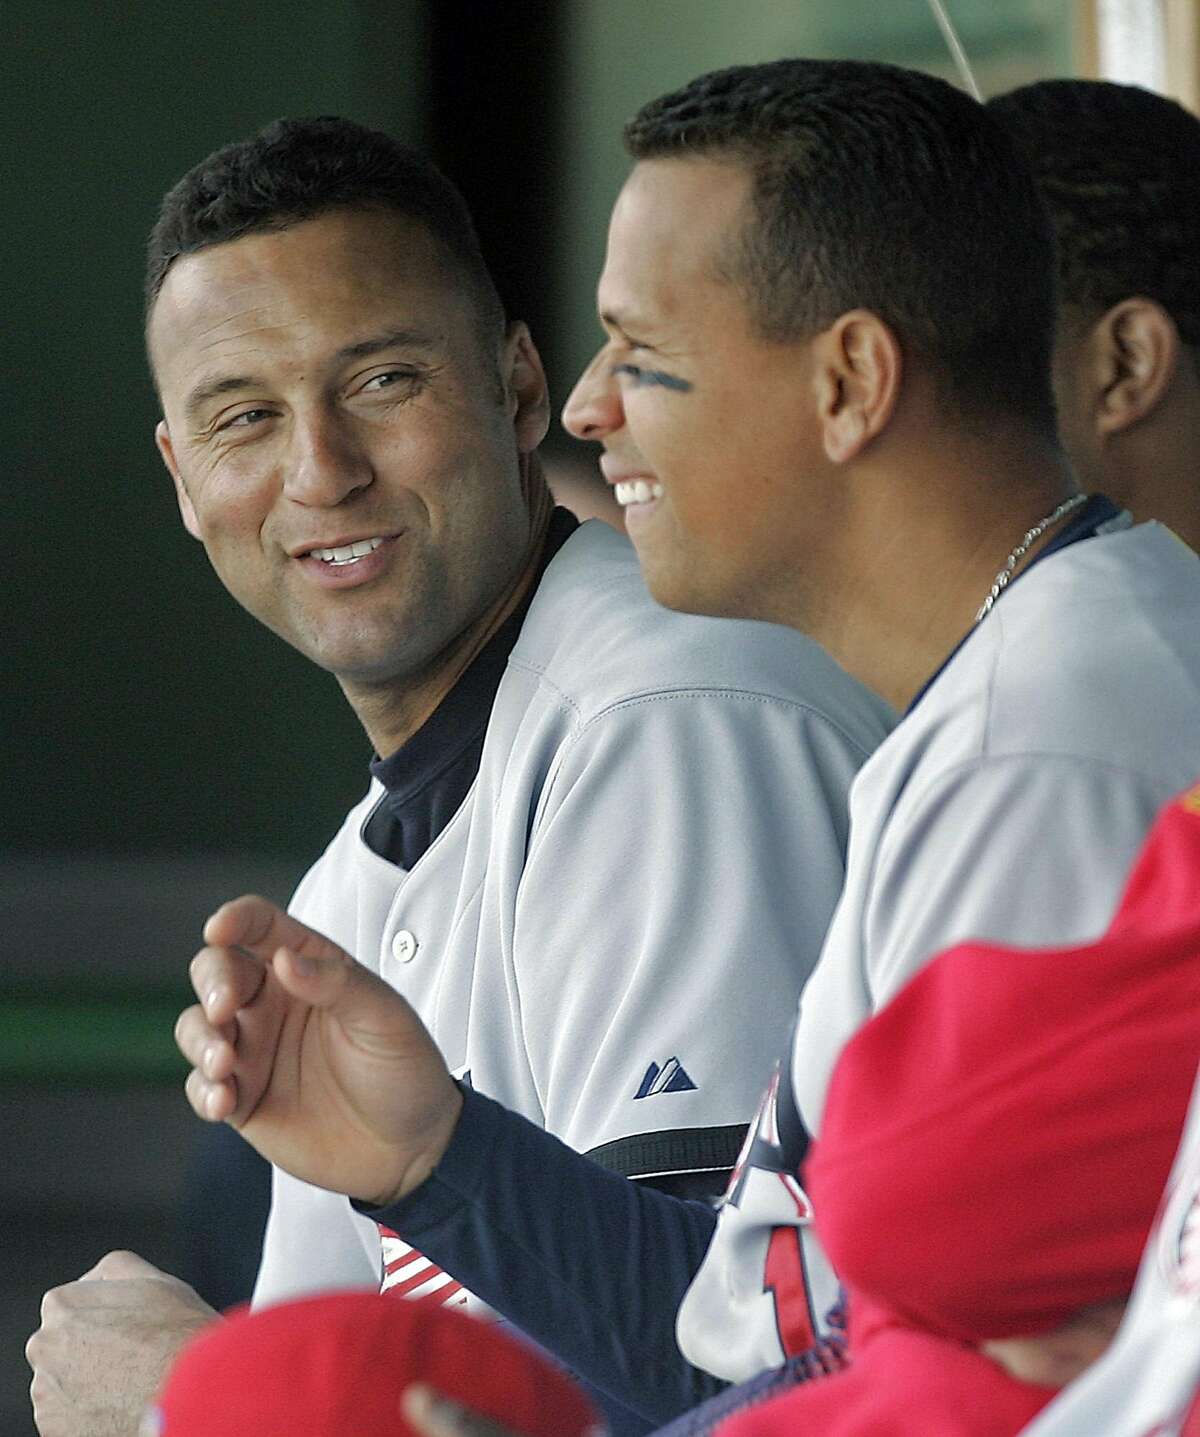 USA's Derek Jeter, left, and Alex Rodriguez share a moment in the dugout during the fourth inning of their Round 1 World Baseball Classic game against South Africa Friday, March 10, 2006 in Scottsdale, Ariz. USA won, 17-0. (AP Photo/Morry Gash)